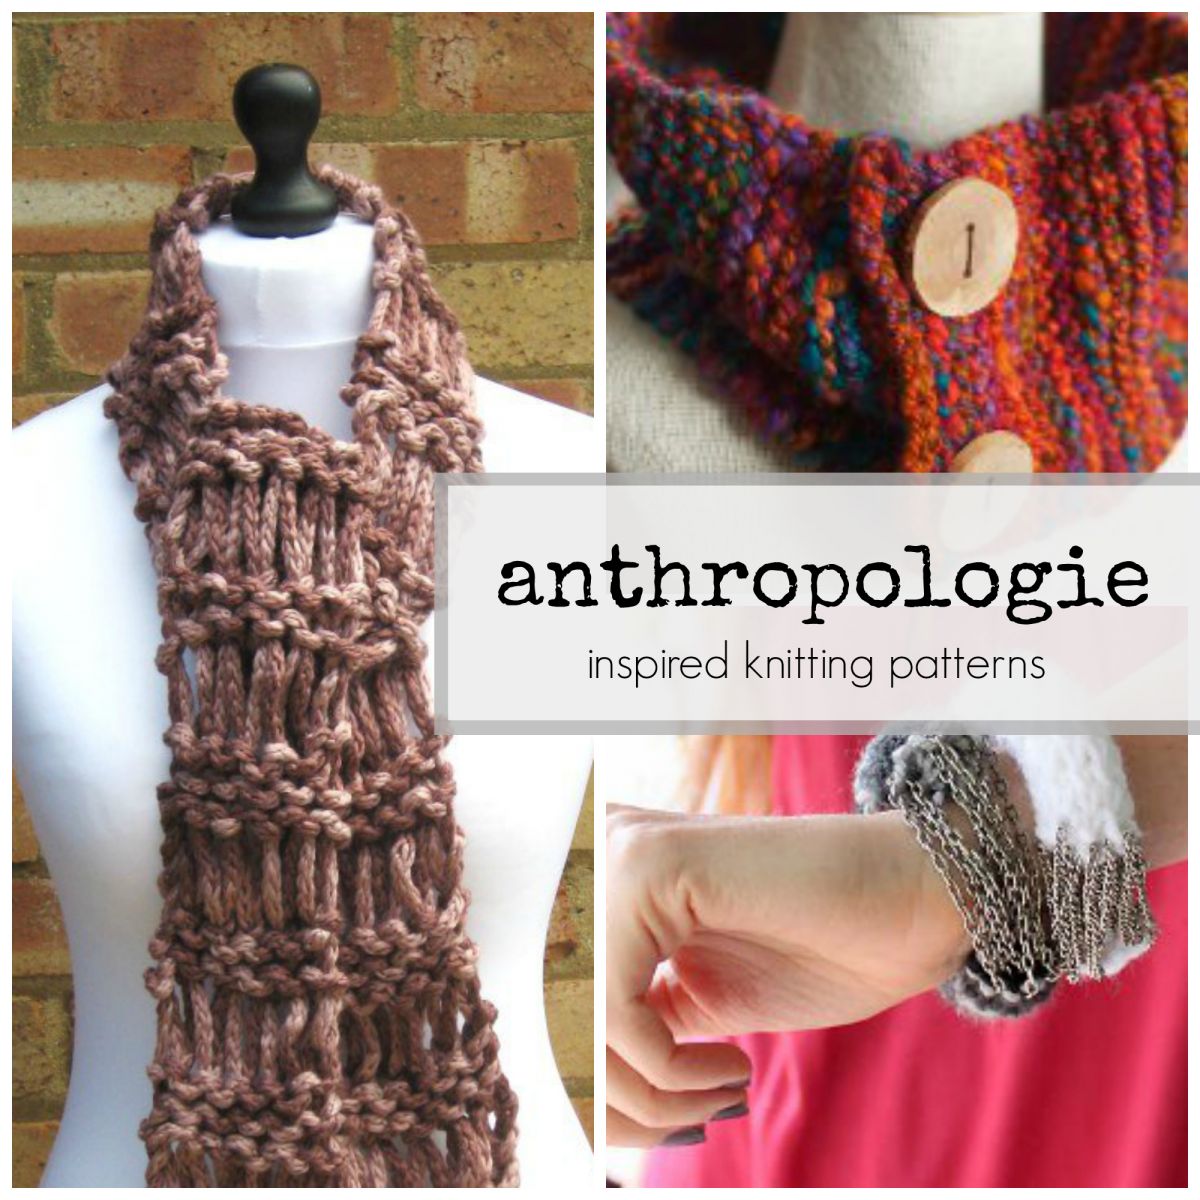 Anthropologie Inspired Kniting Patterns